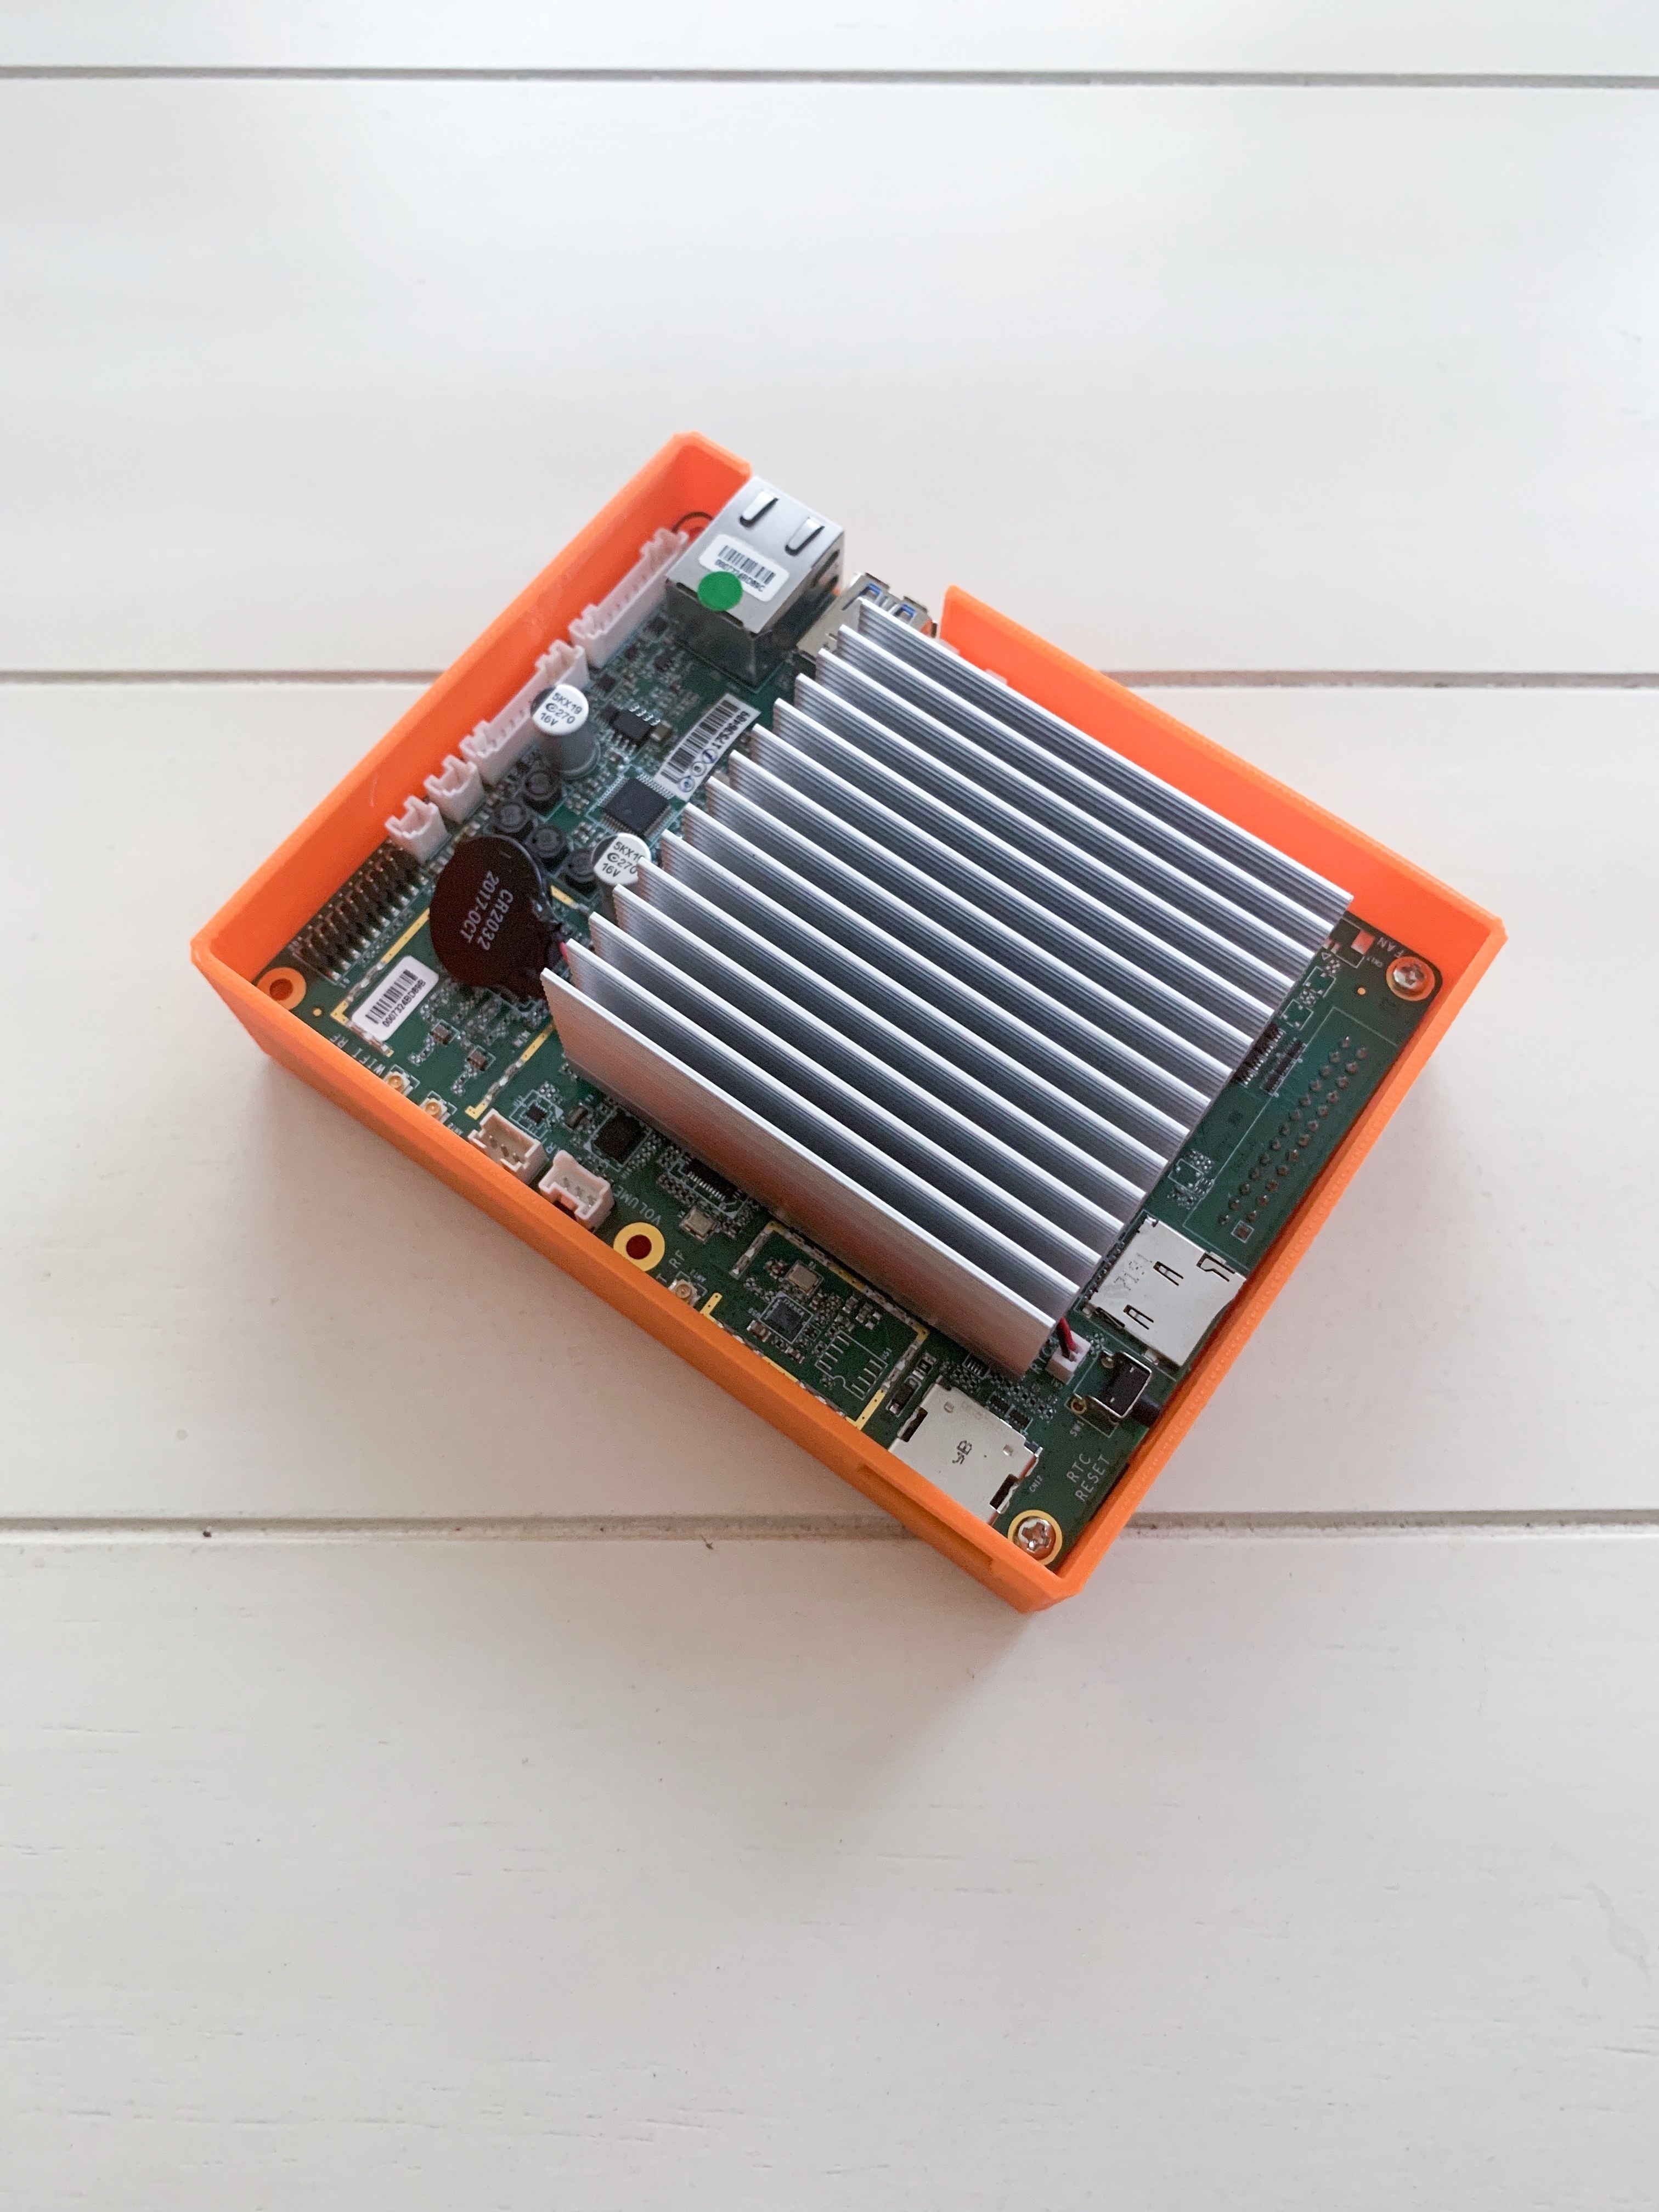 NEW Limited Stock **** Atomic Pi Baby Breakout board Shield **** 